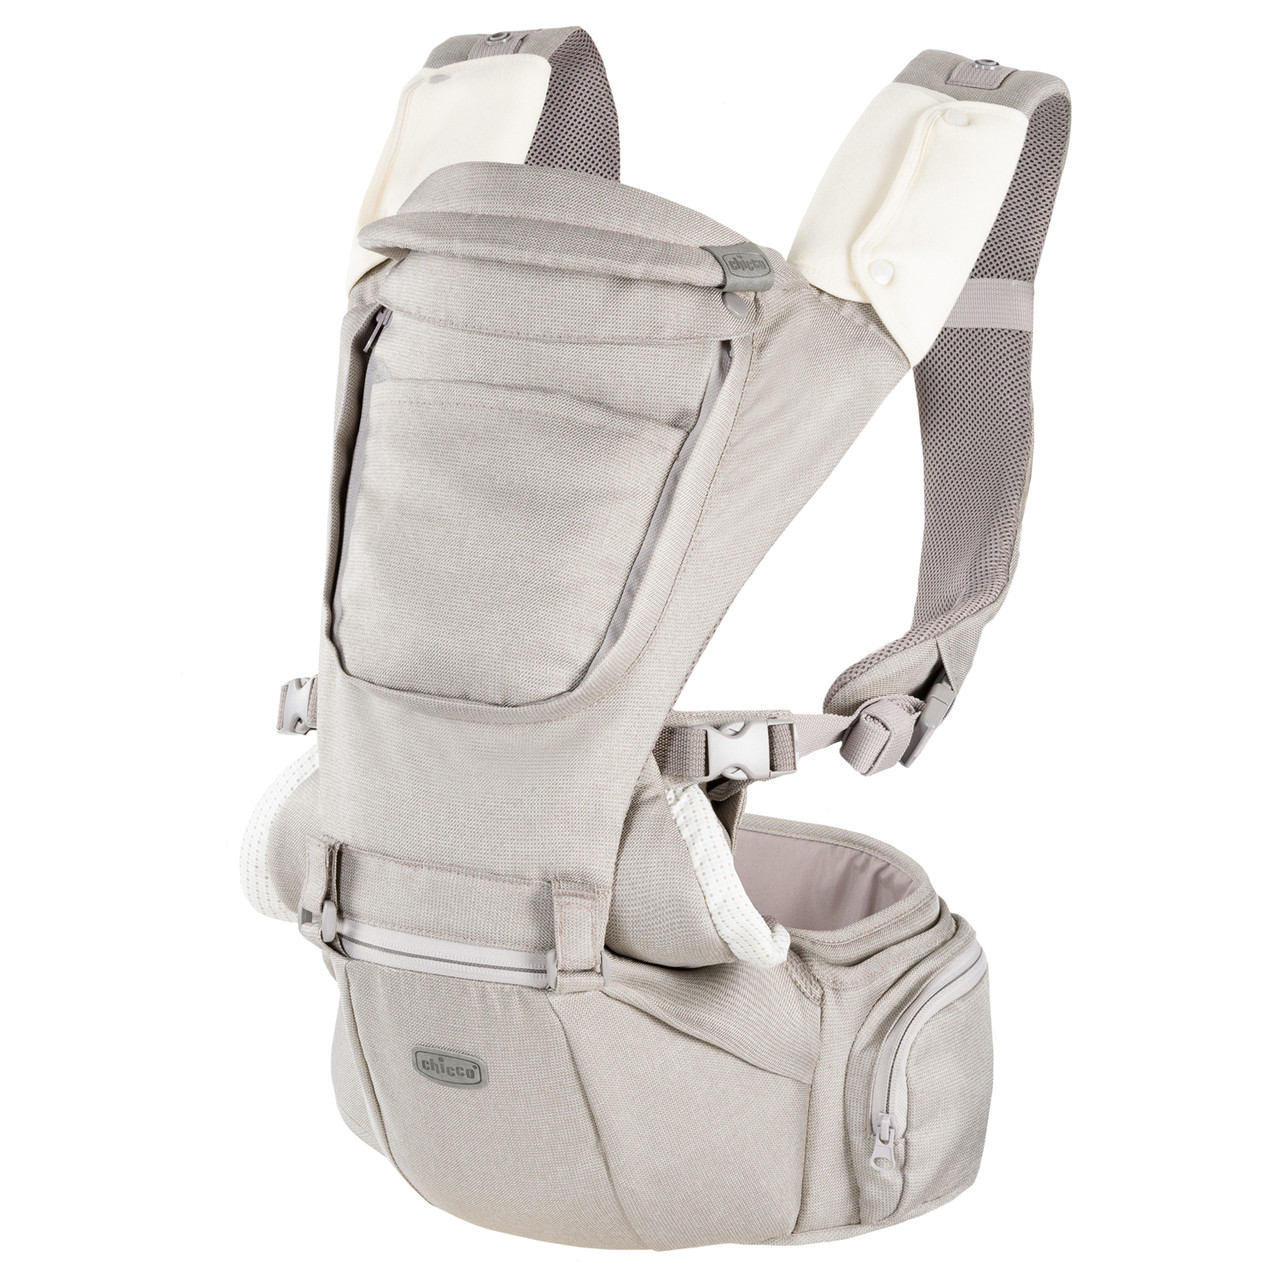 in Hip Seat Baby Carrier Chicco Wherever there's a baby